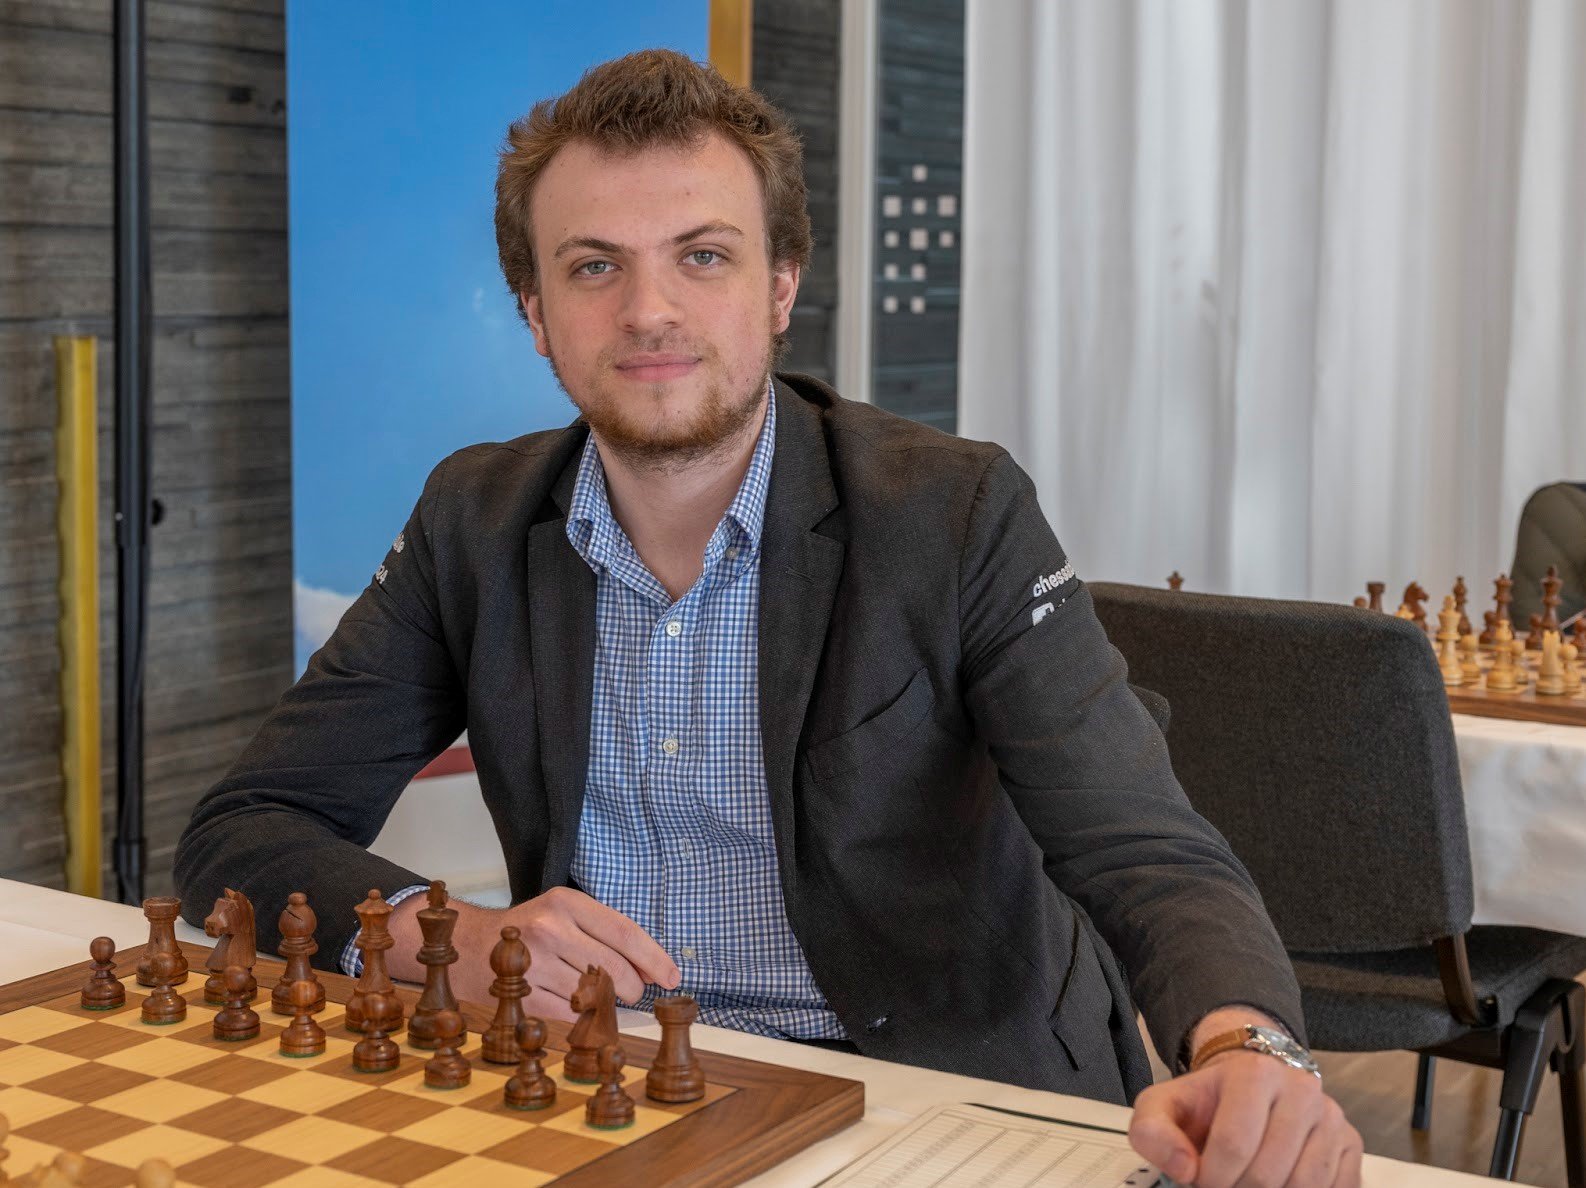 Chess.com says Hans Niemann likely cheated more than 100 times